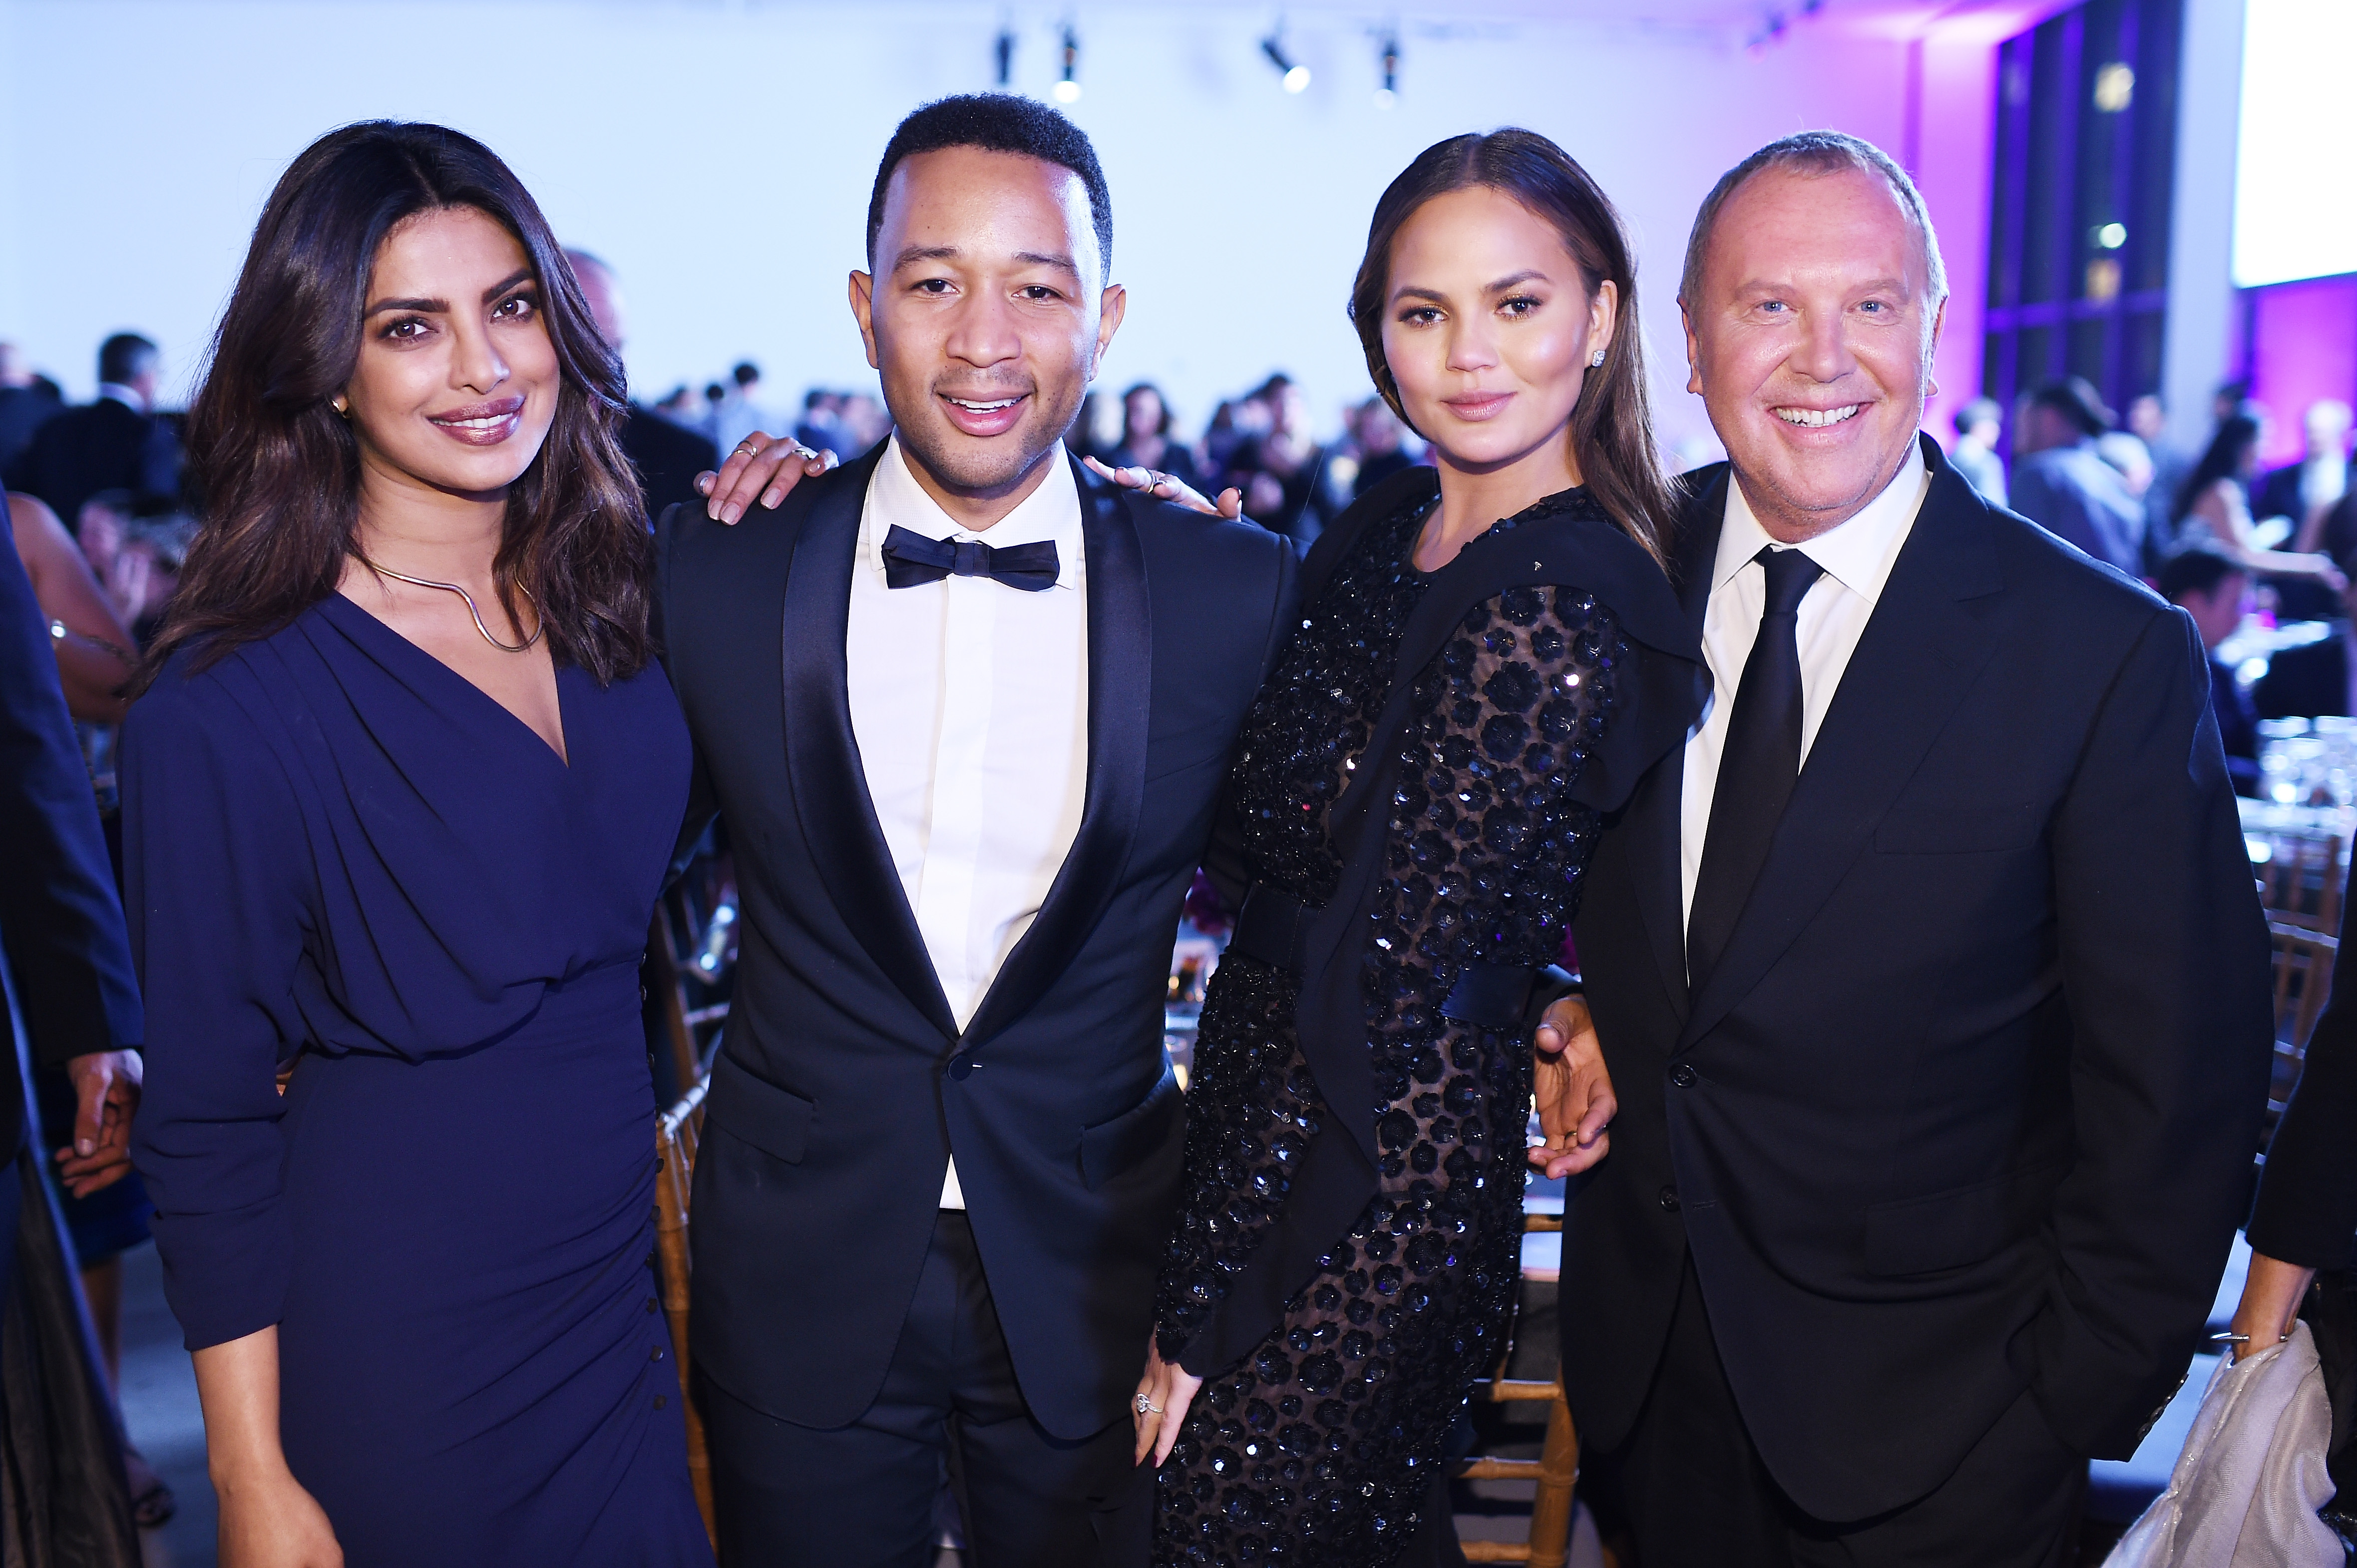 Michael Kors, Neil Patrick Harris, and Kate Hudson Come Out for God's Love We Deliver - Daily Front Row (blog)